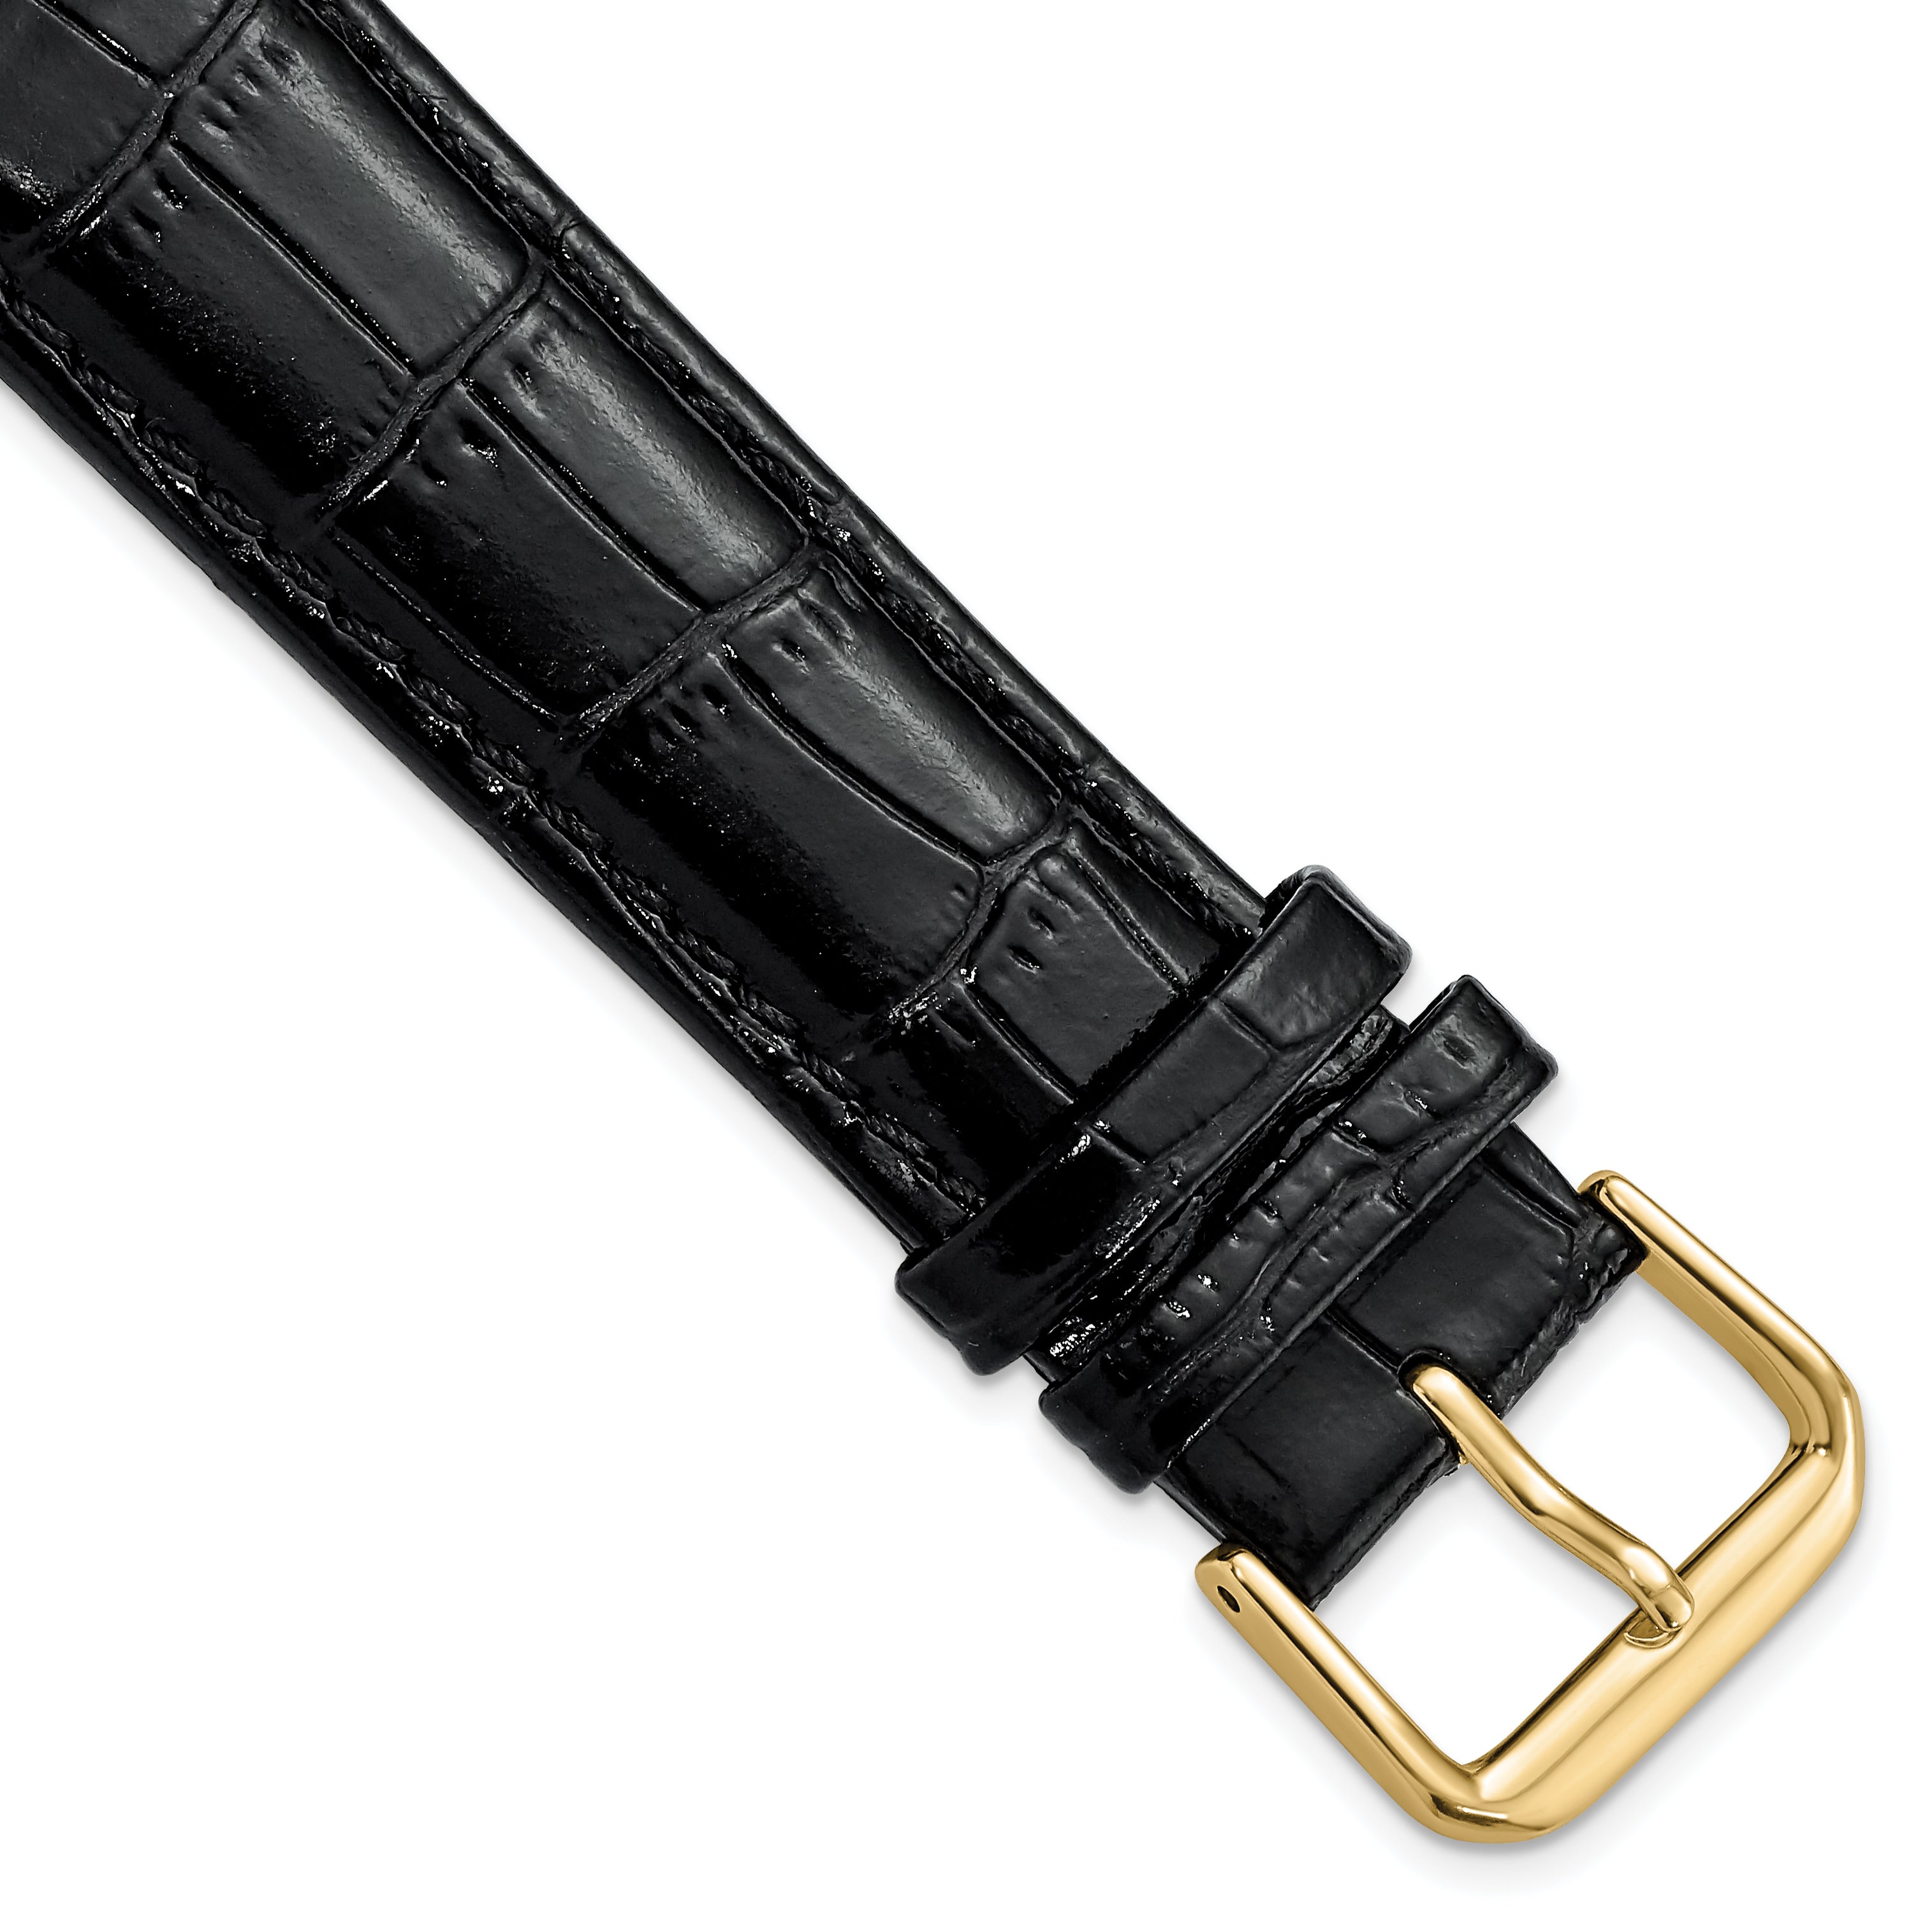 DeBeer 20mm Black Crocodile Grain Leather with Dark Stitching and Gold-tone Buckle 7.5 inch Watch Band